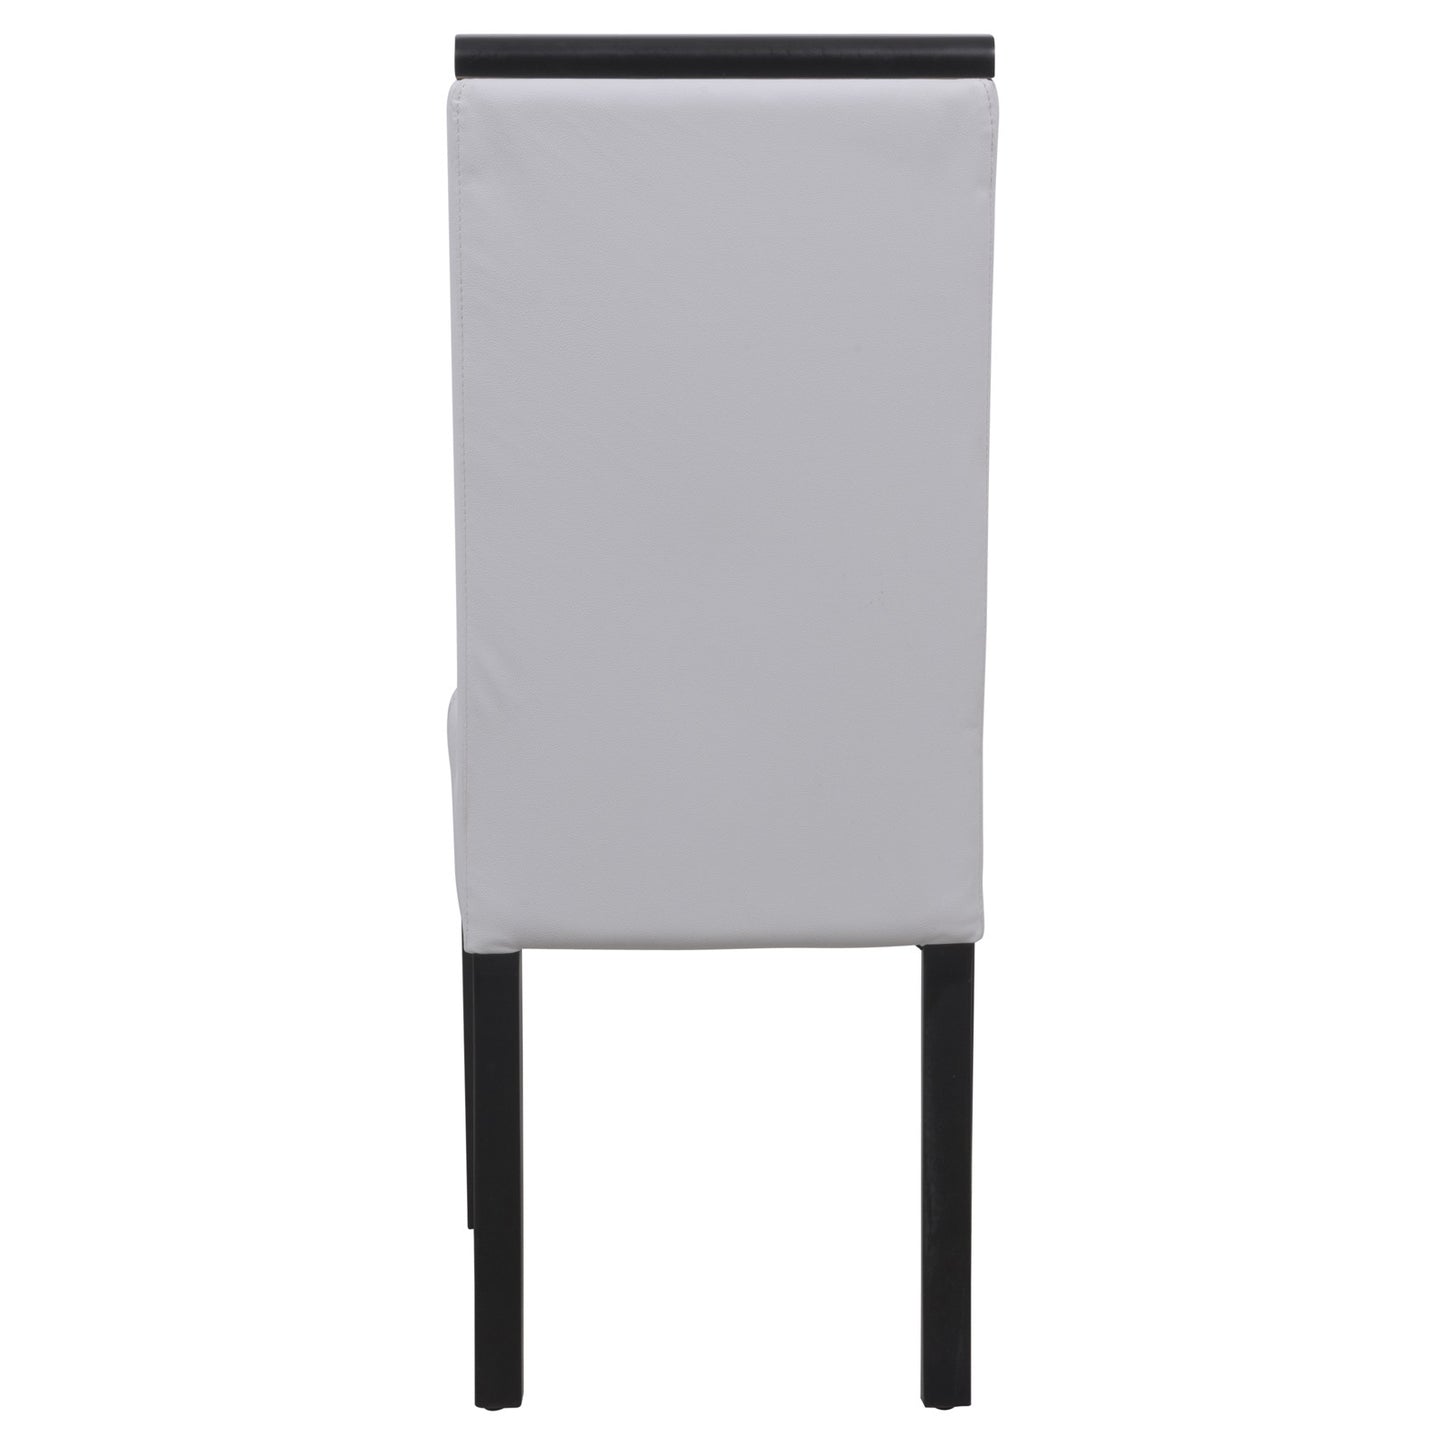 Elyse White Vinyl Leather Dining Chair - living-essentials